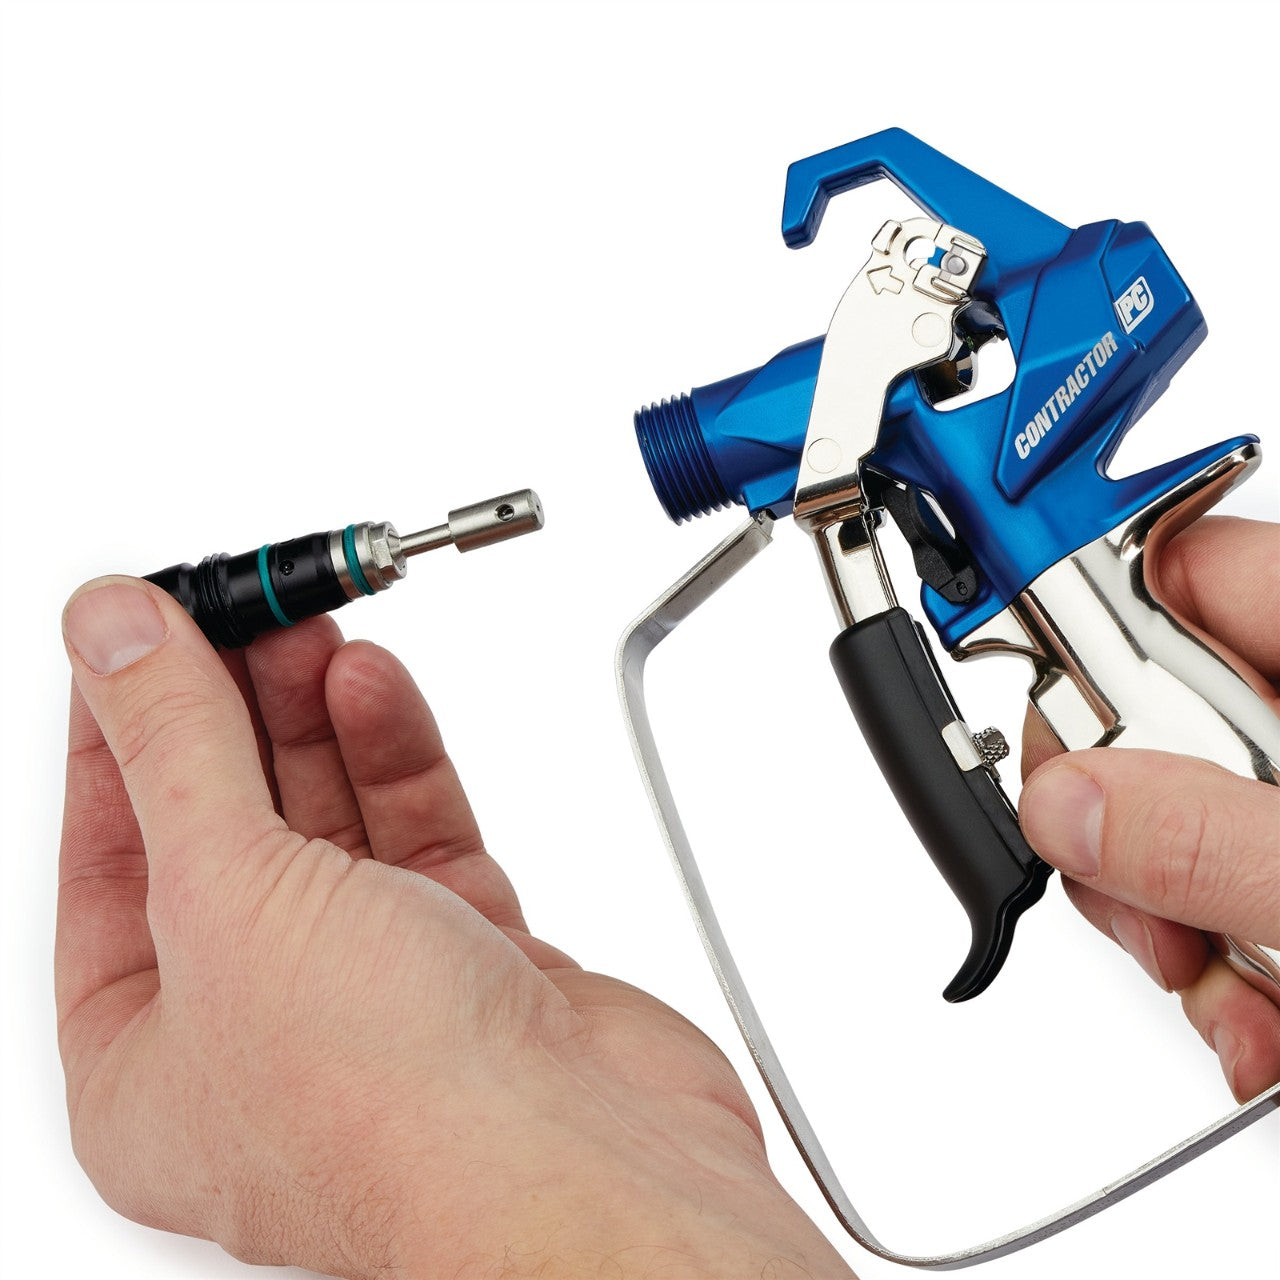 Contractor PC Compact Airless Spray Gun with RAC X FFLP 517 SwitchTip